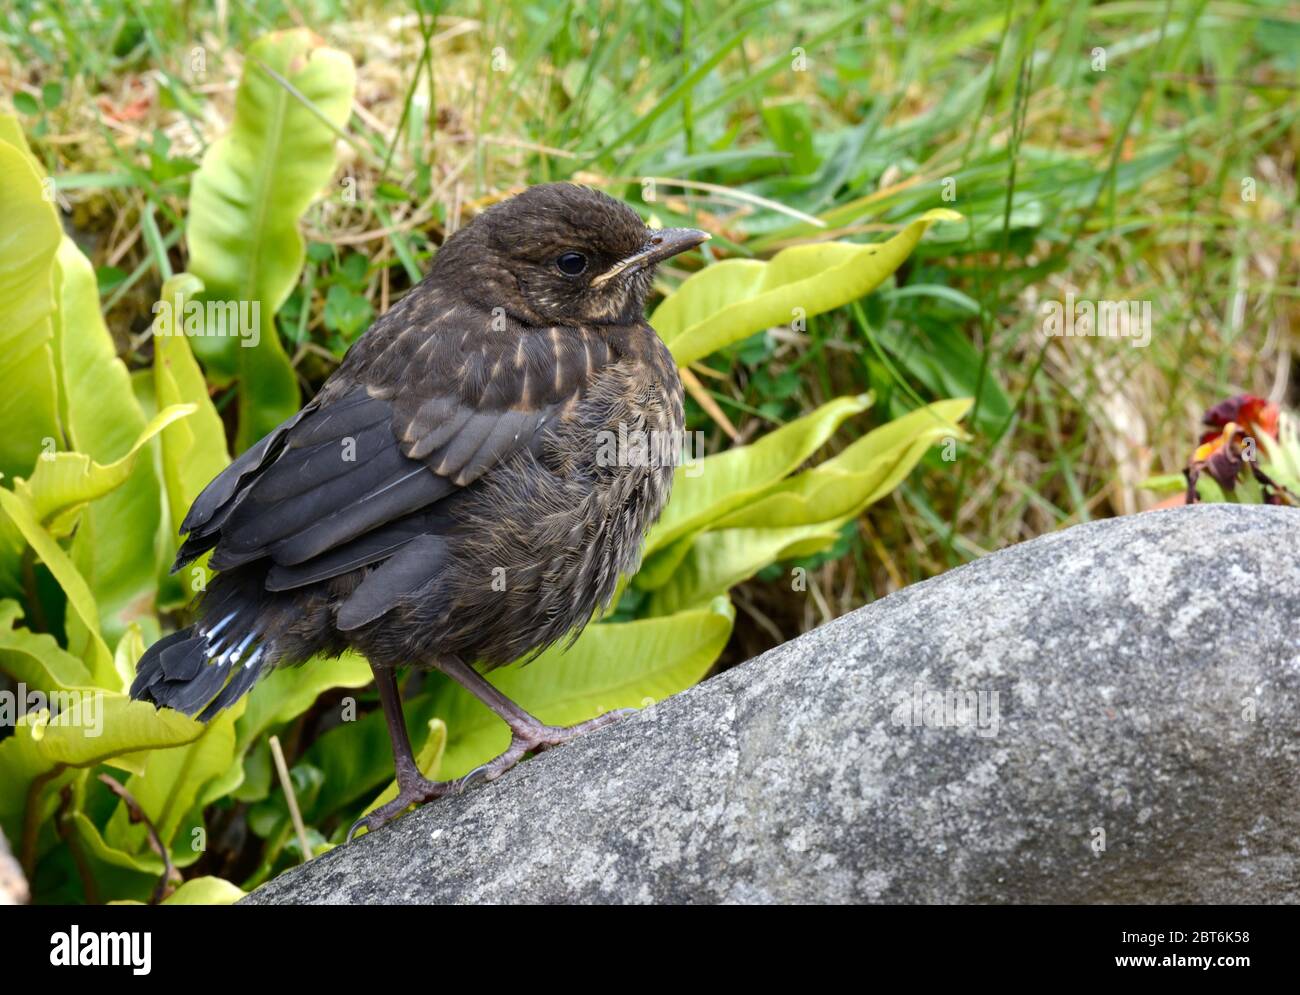 A young juvenile blackbird fledgling Turdus merula standing on a stone in the garden Stock Photo